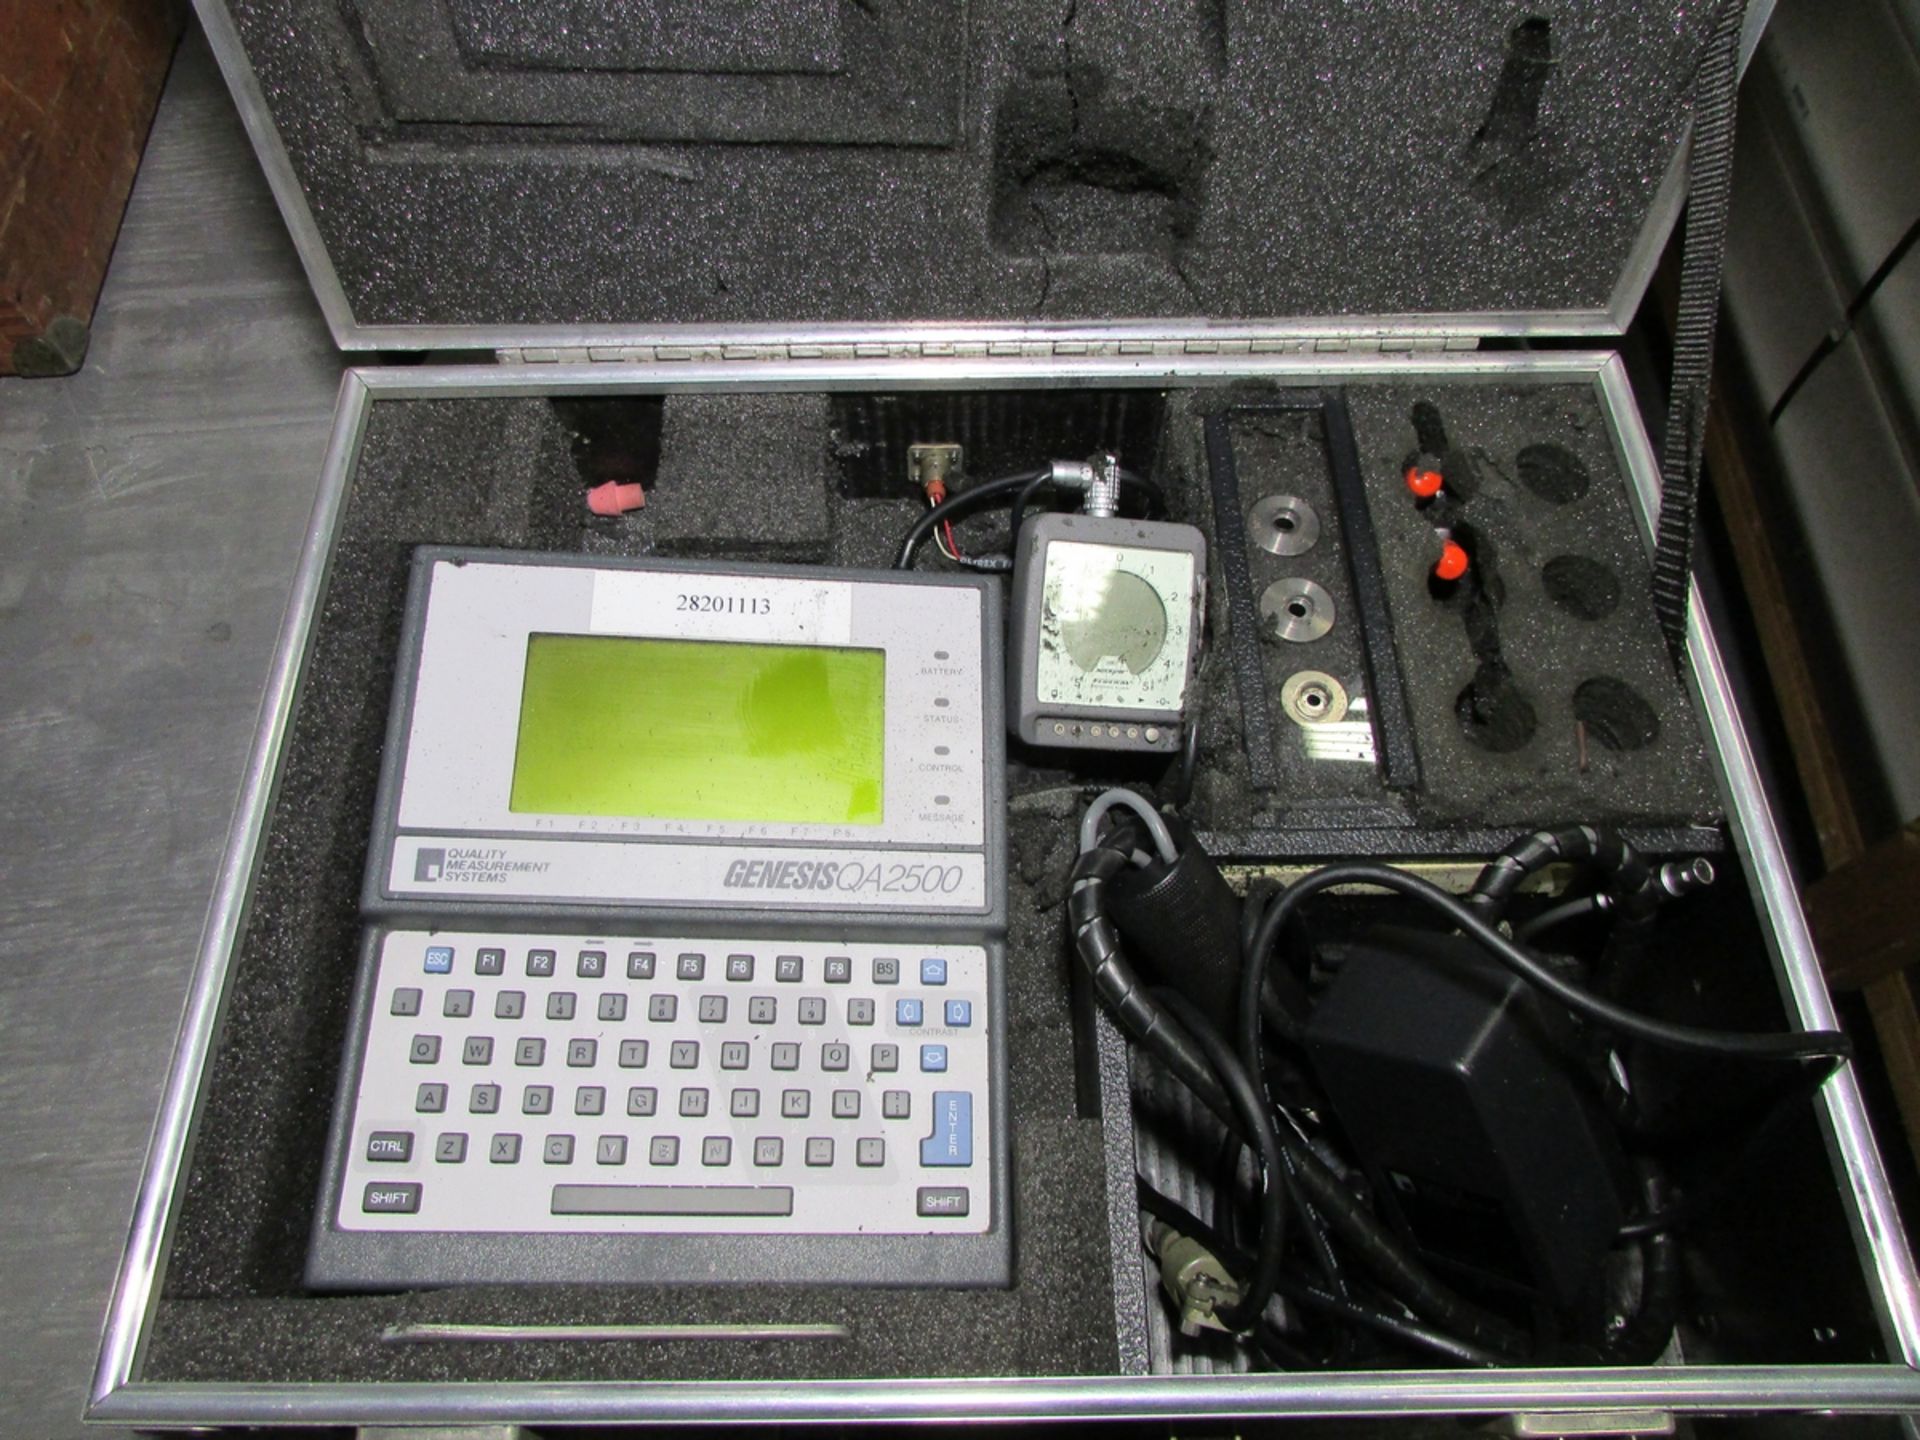 QUALITY MEASUREMENT SYSTEMS GAGE SYSTEM DATA COLLECTOR, MODEL GENESIS QA2500 - Image 2 of 3